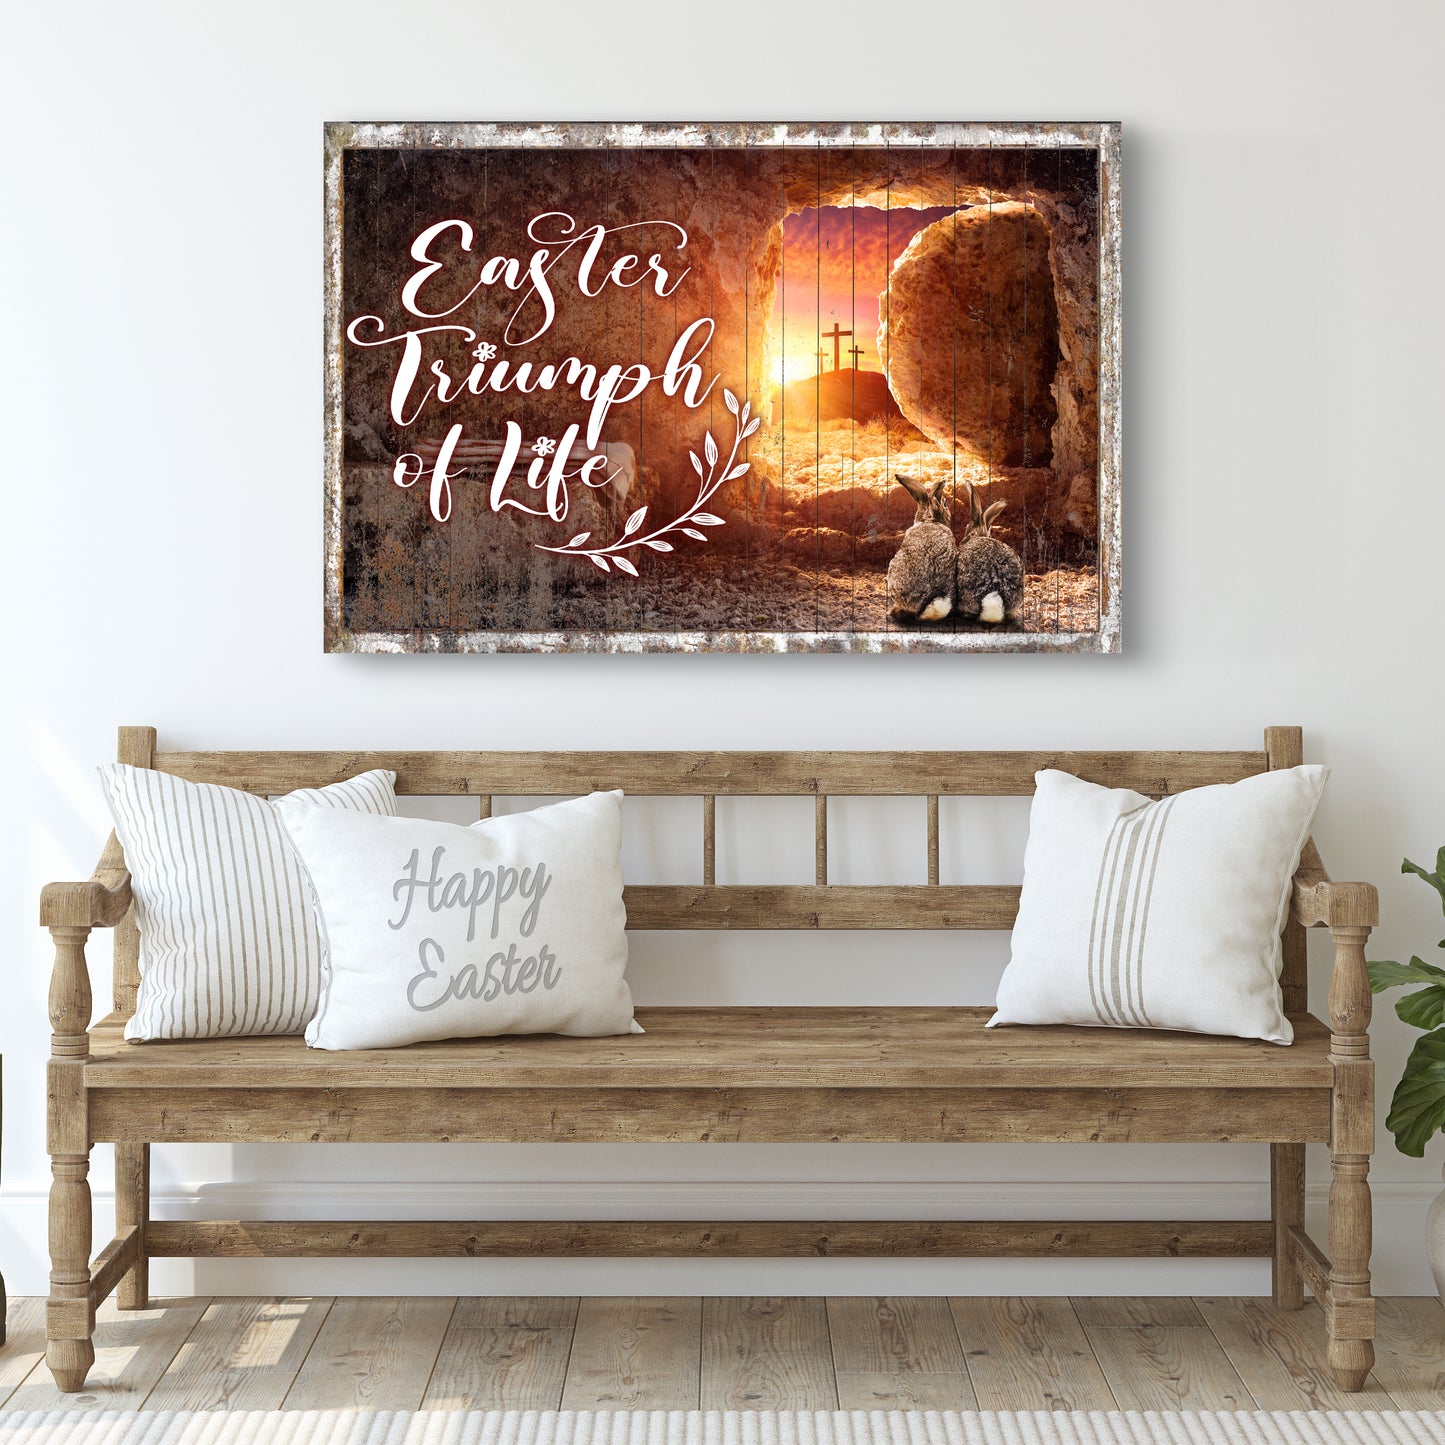 Easter Triumph Of Life Sign - Image by Tailored Canvases